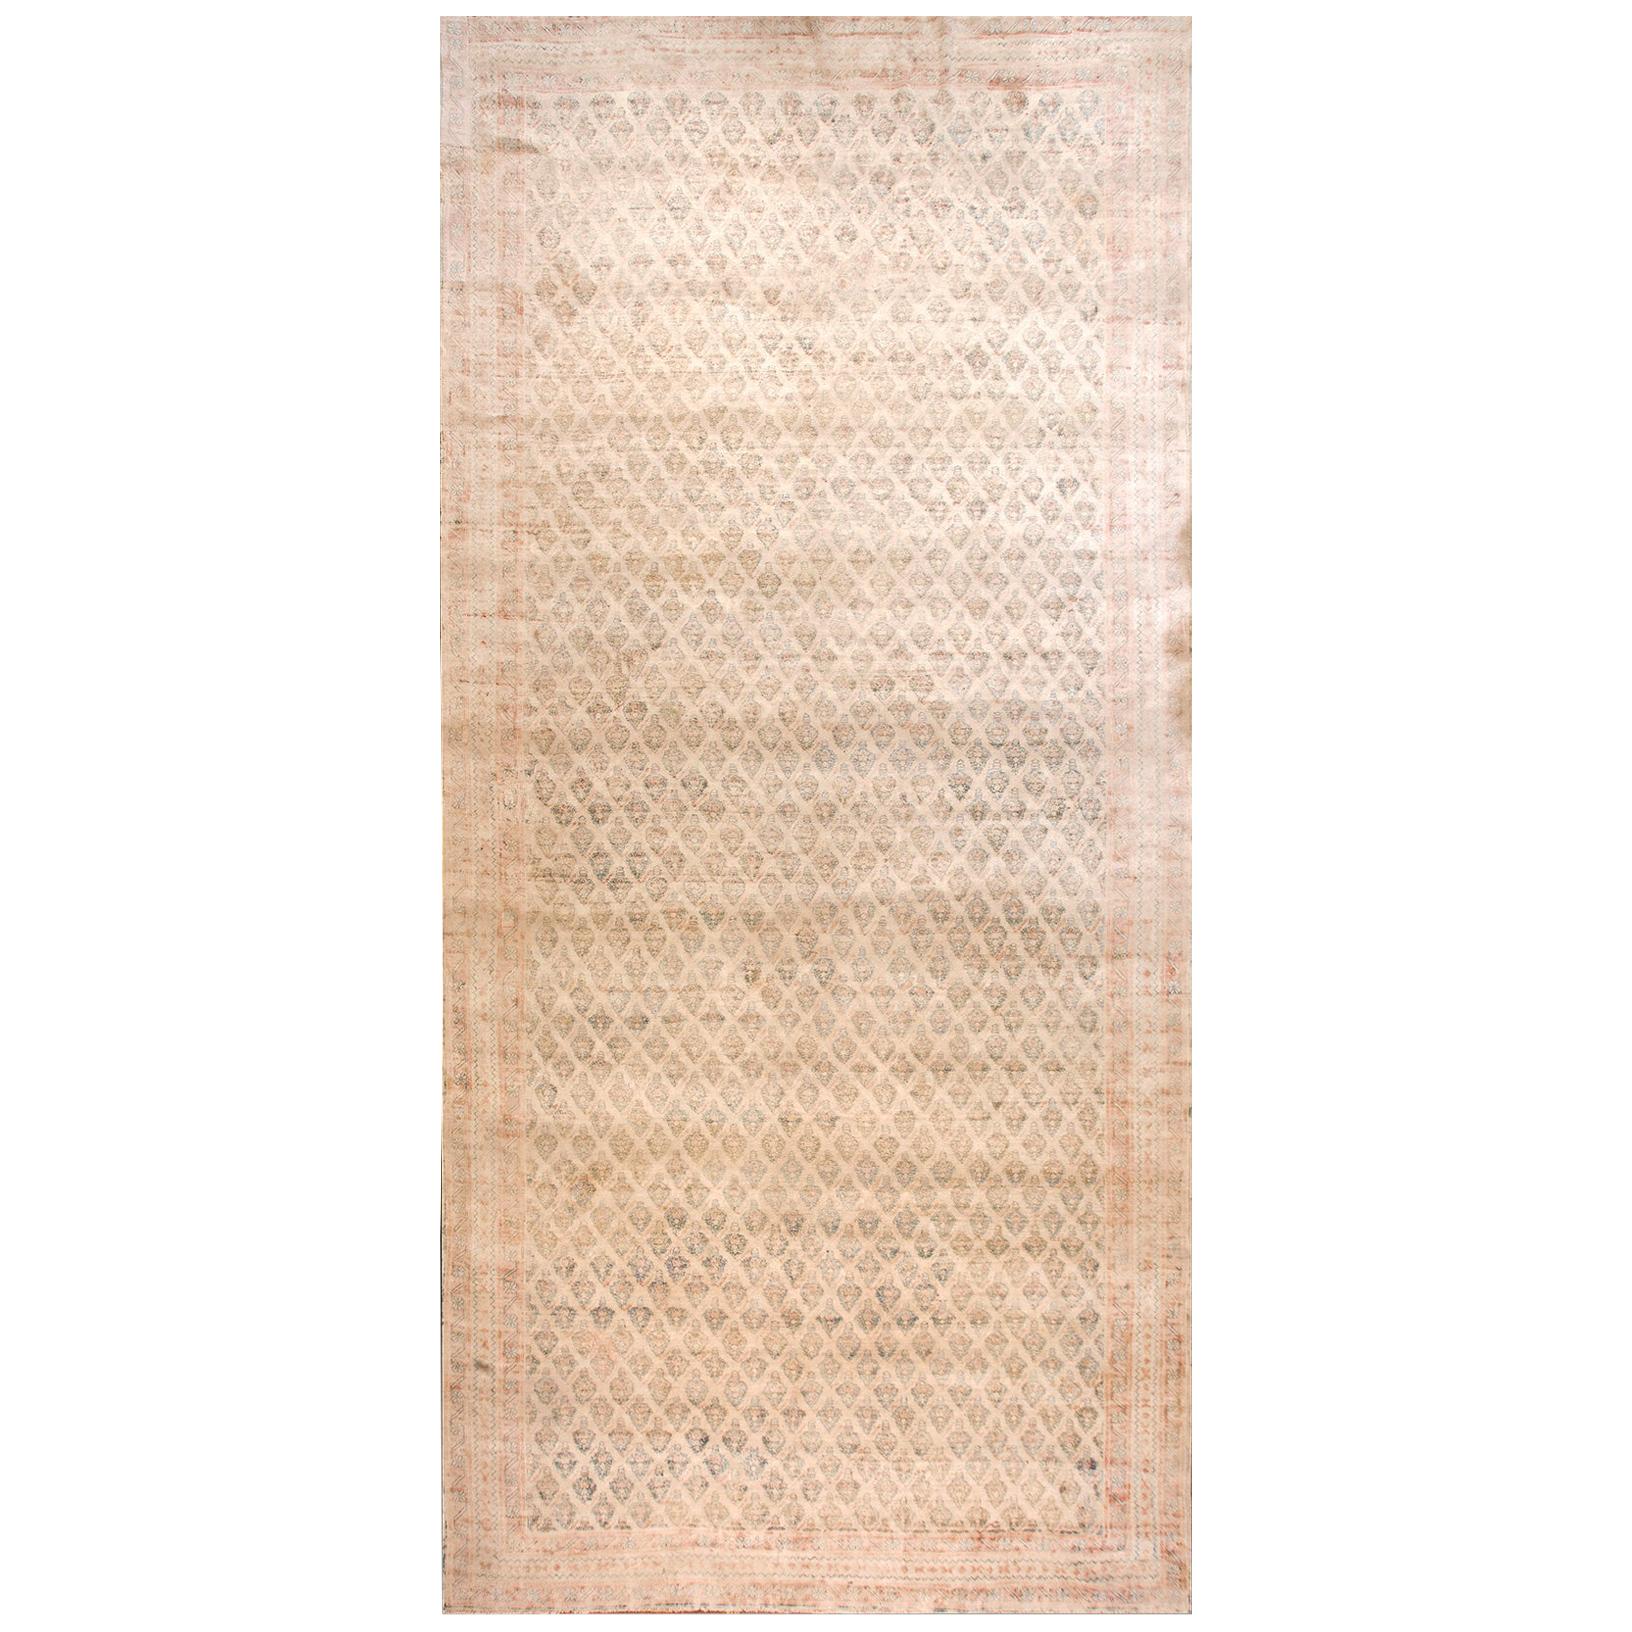 Early 20th Century Indian Cotton Agra Carpet ( 9'8" x 21'2" - 295 x 645 ) For Sale